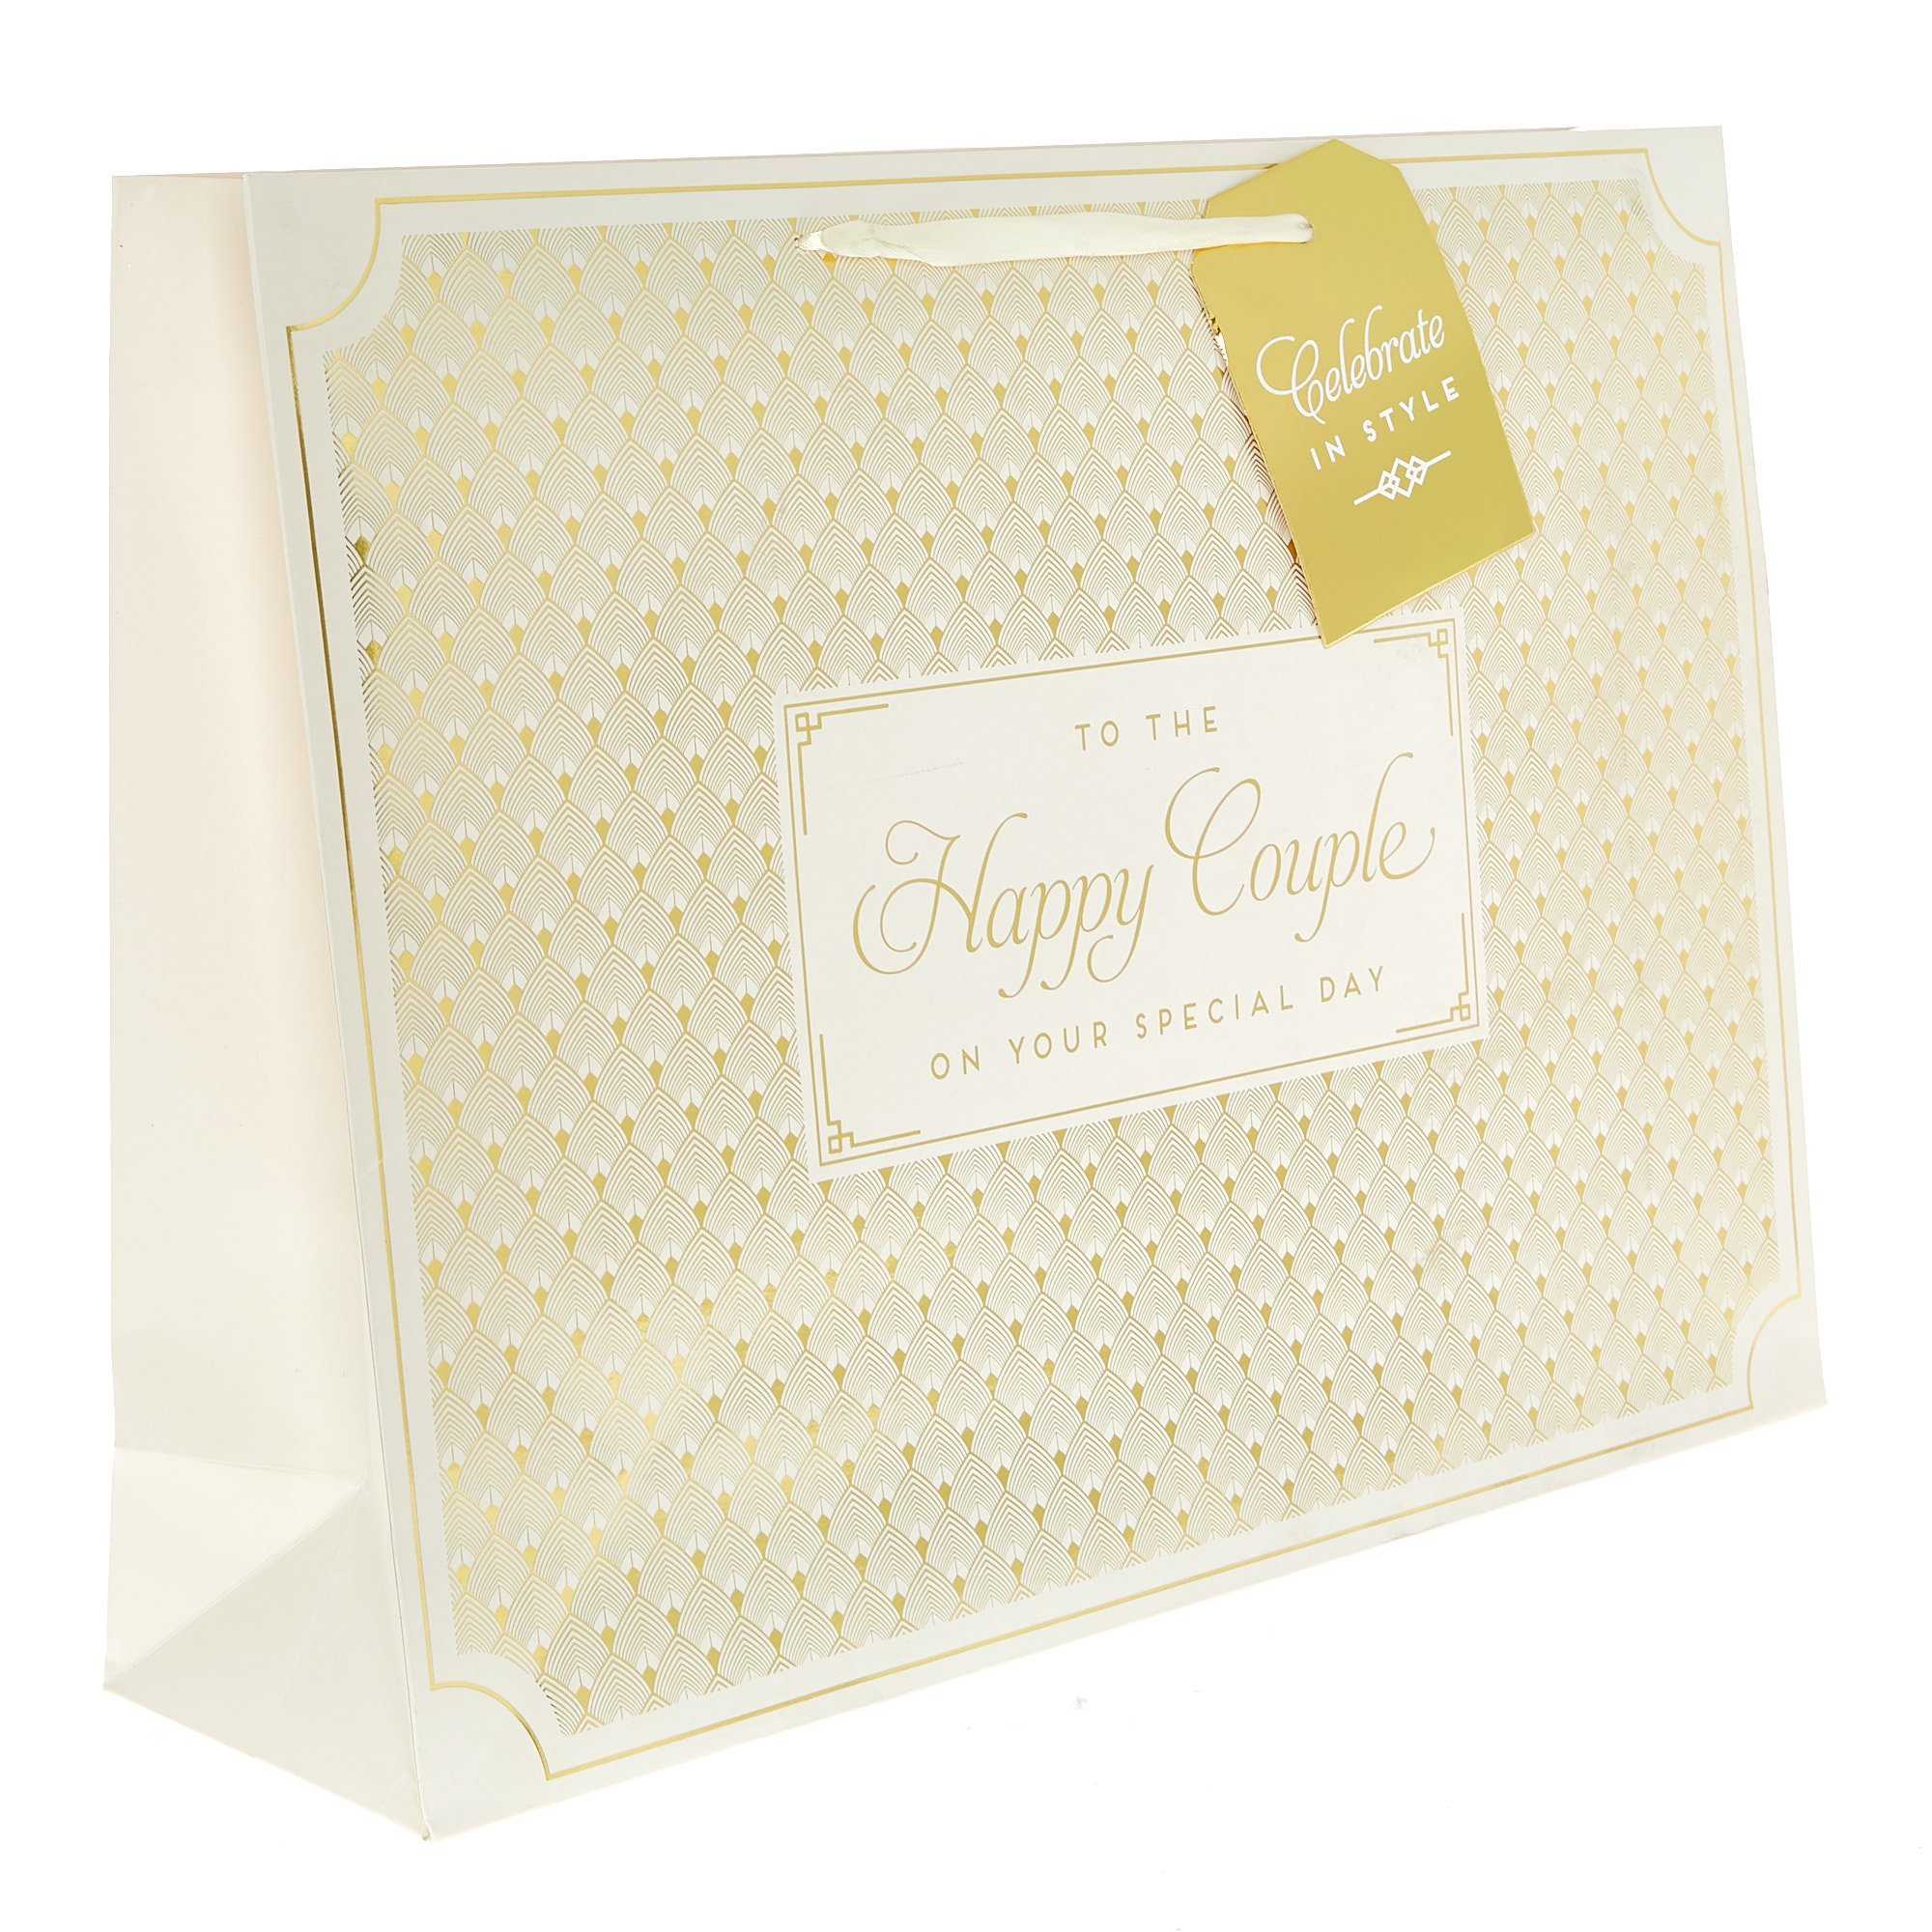 Extra Large Landscape Gift Bag - To The Happy Couple